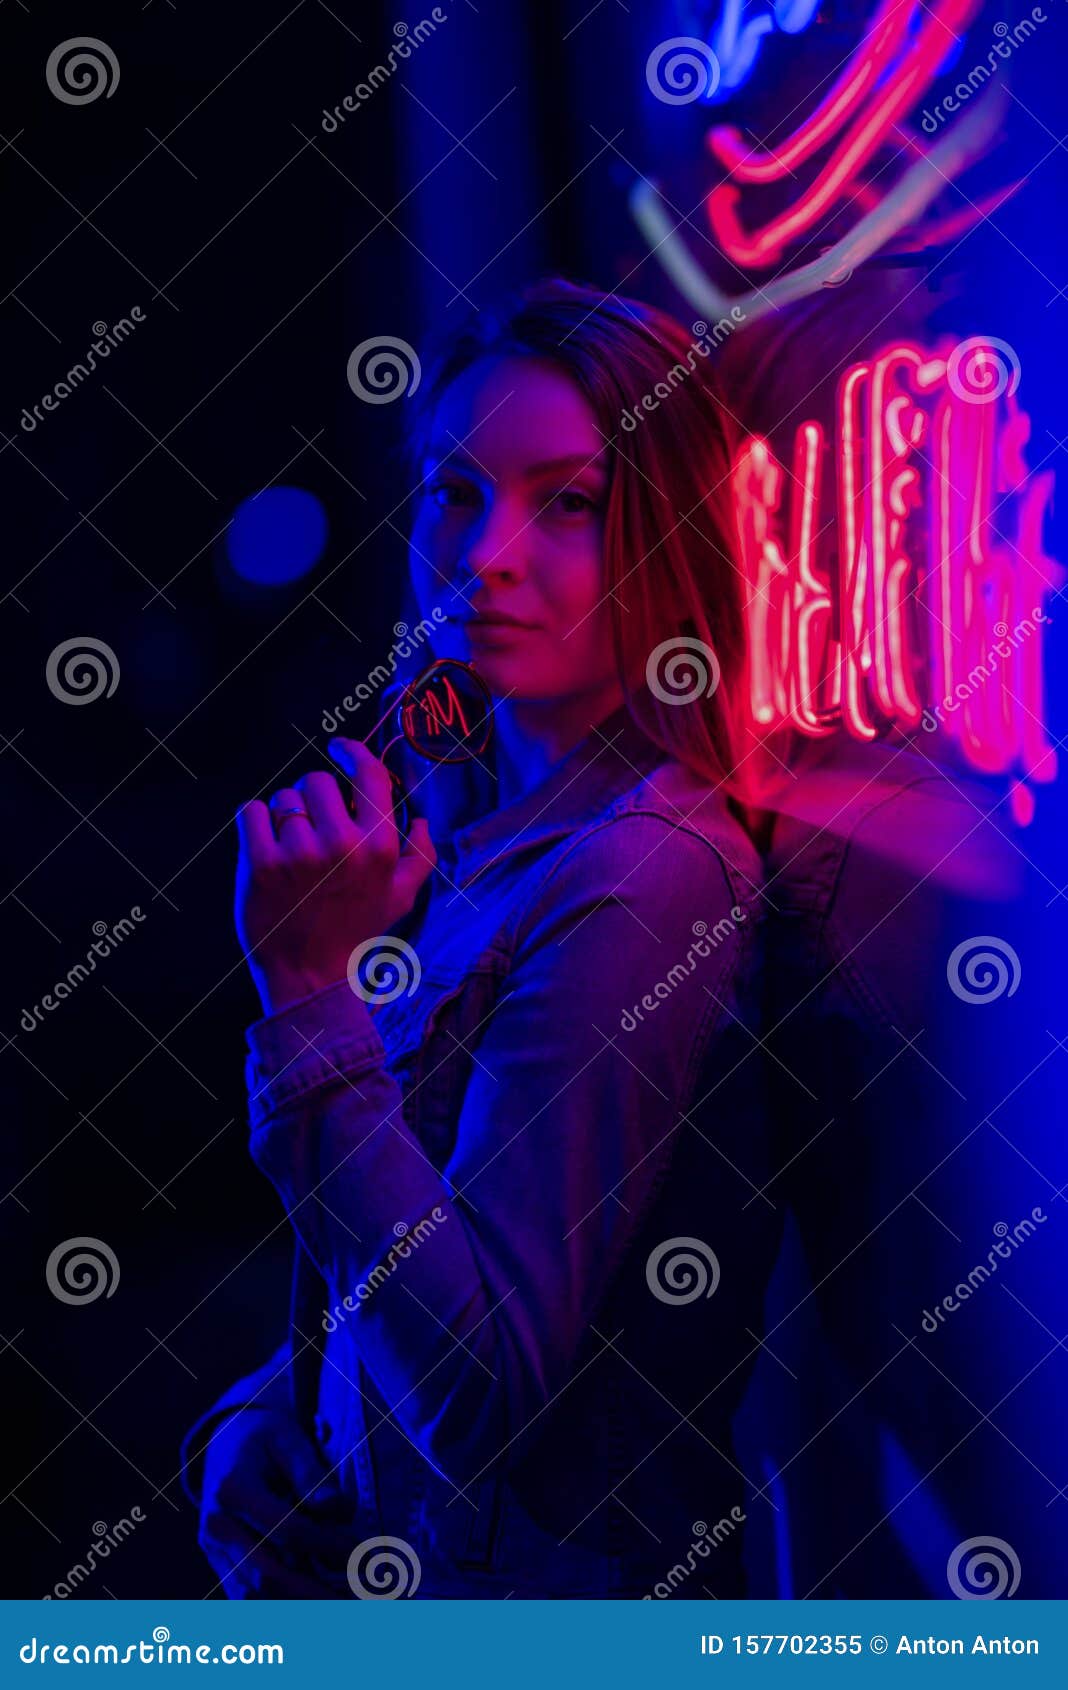 Creative Sexual Portrait of a Girl in Neon Lighting with Glasses, Night Party, Dancing, Game Business, Striptease Stock Image photo